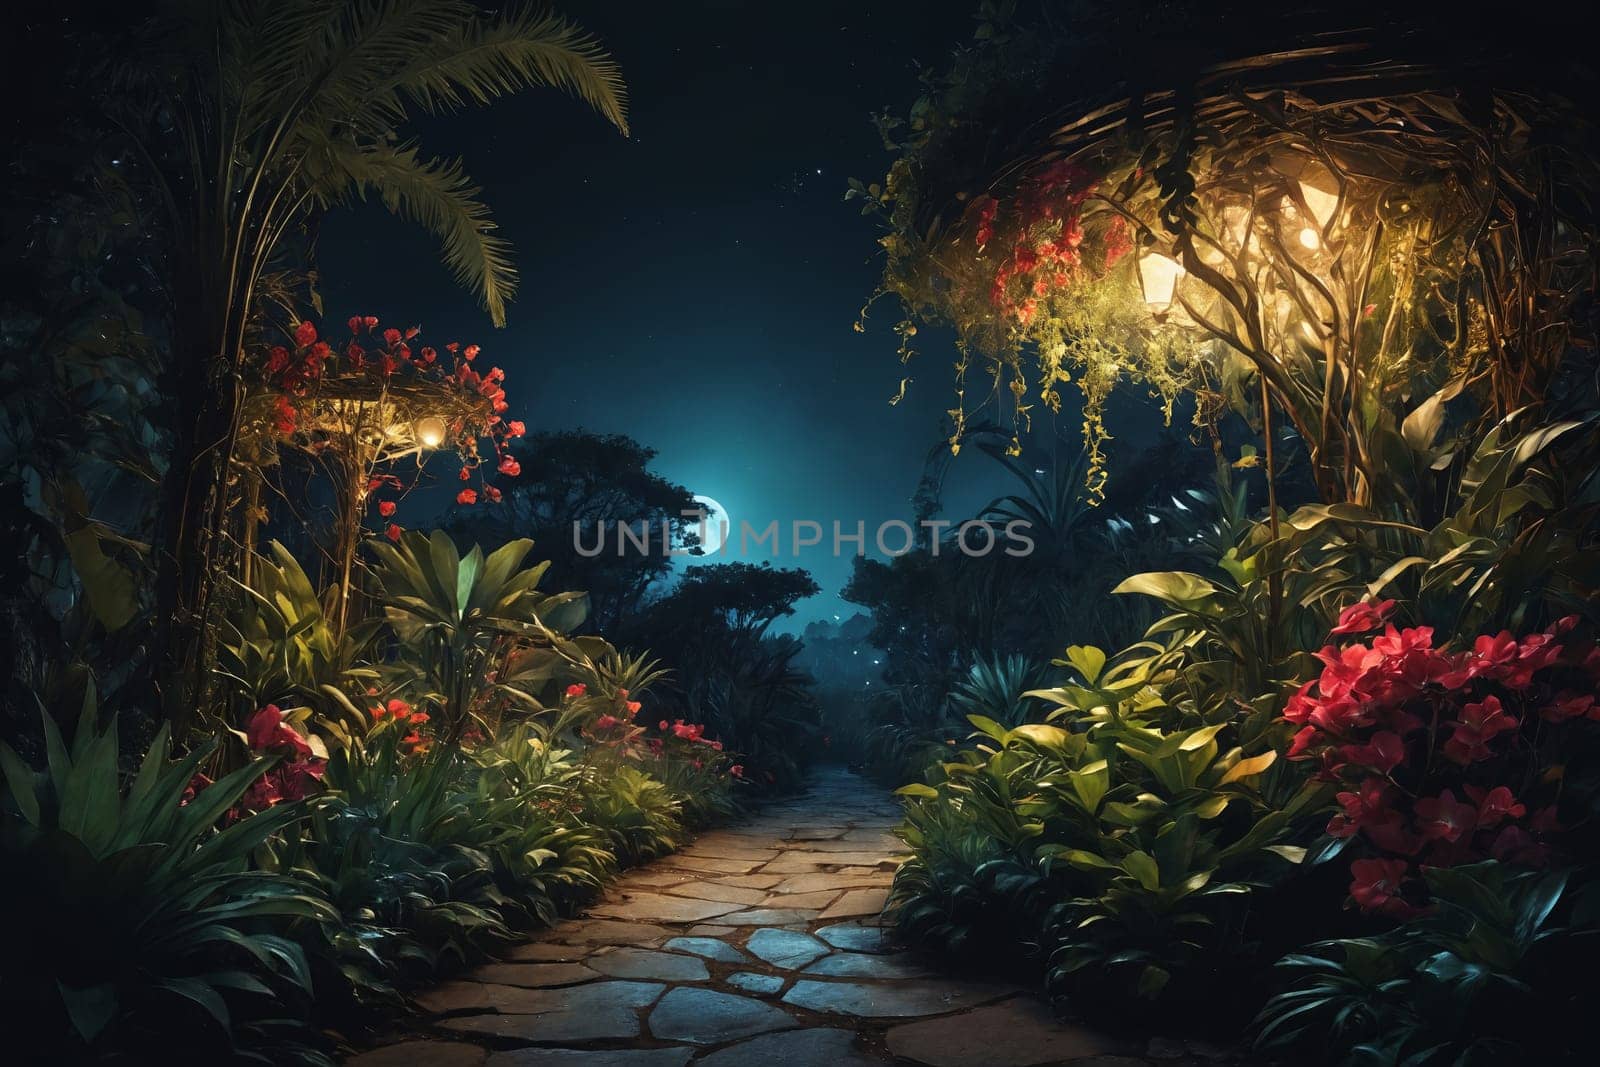 The image offers a stunning view of a tropical garden at night, marked by a stone path lit by warm lanterns. The moon shines radiantly above, casting ethereal light on the vibrant flowers. A vine-covered archway at the end hints at a magical journey.